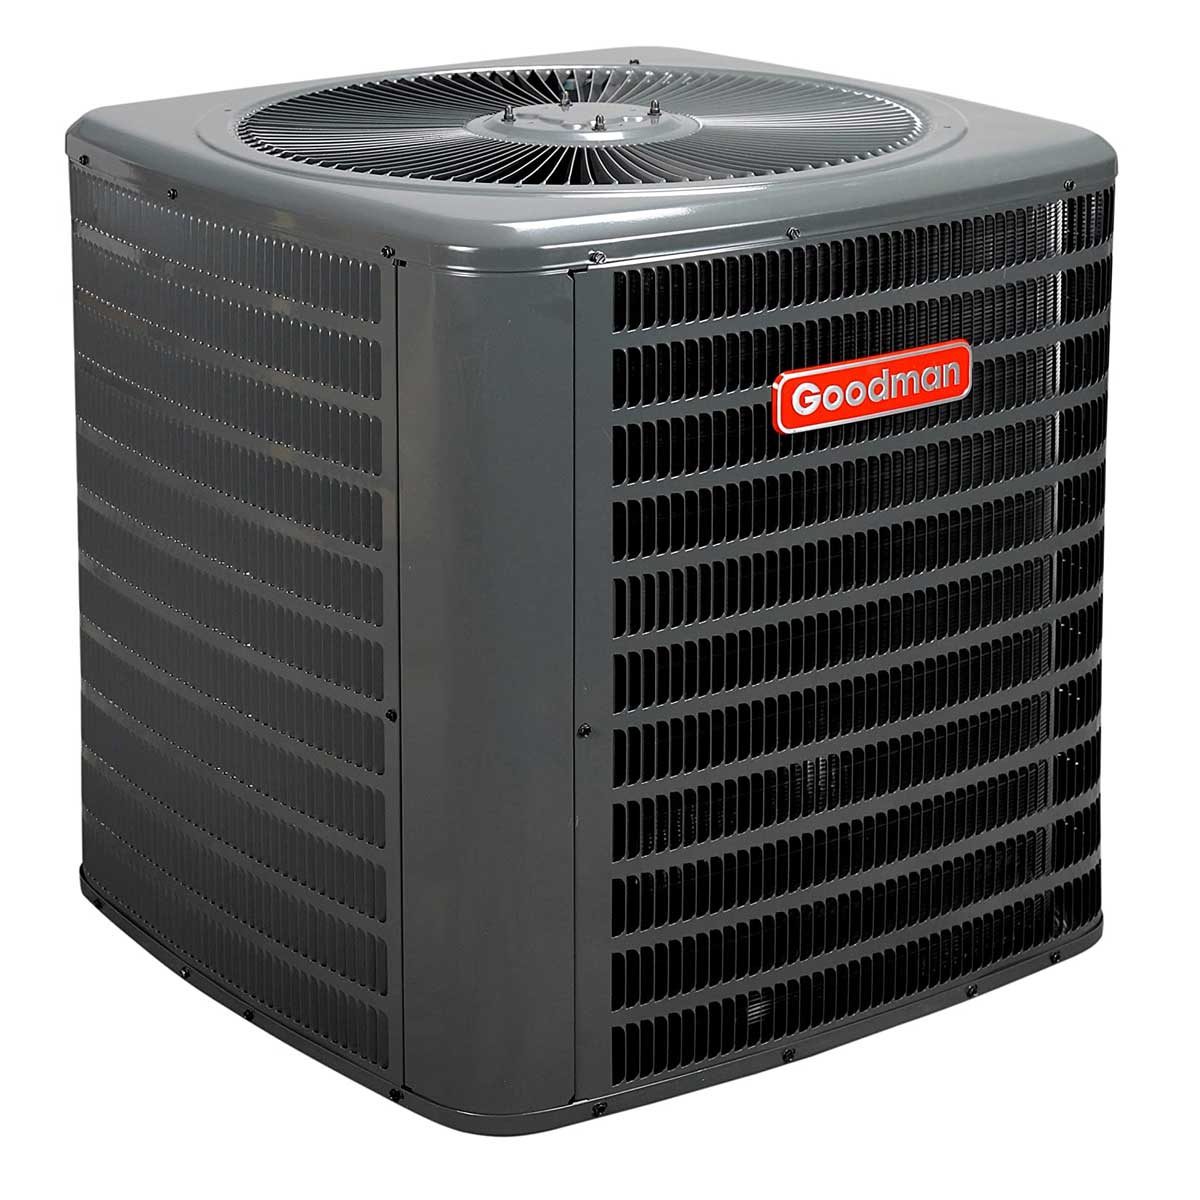 5-best-central-air-conditioner-brands-and-units-for-your-home